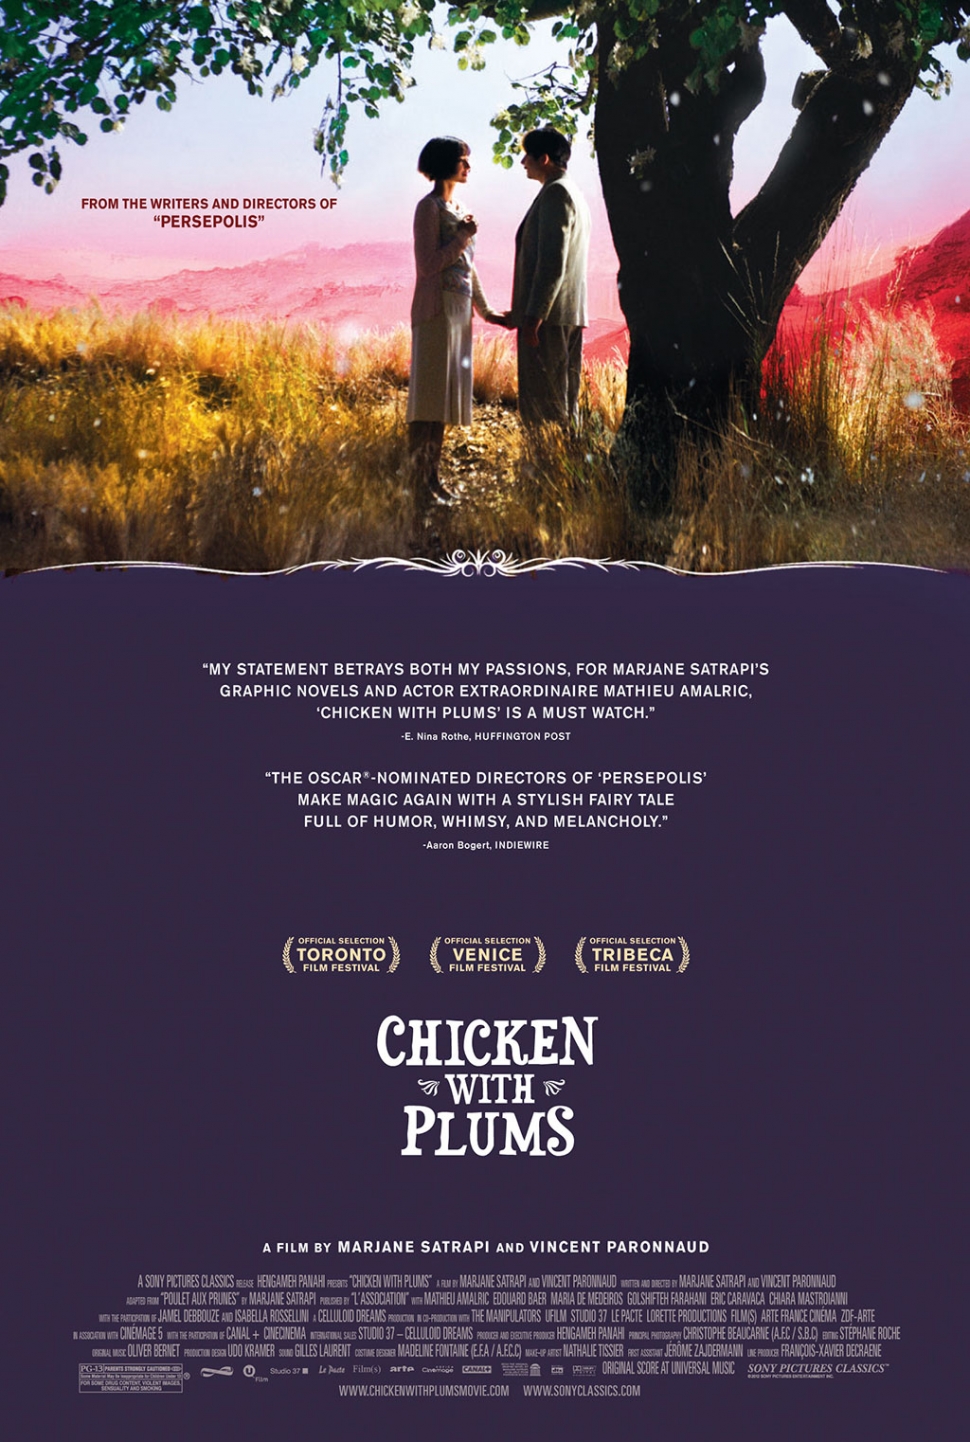 Poster for "Chicken with Plums" 